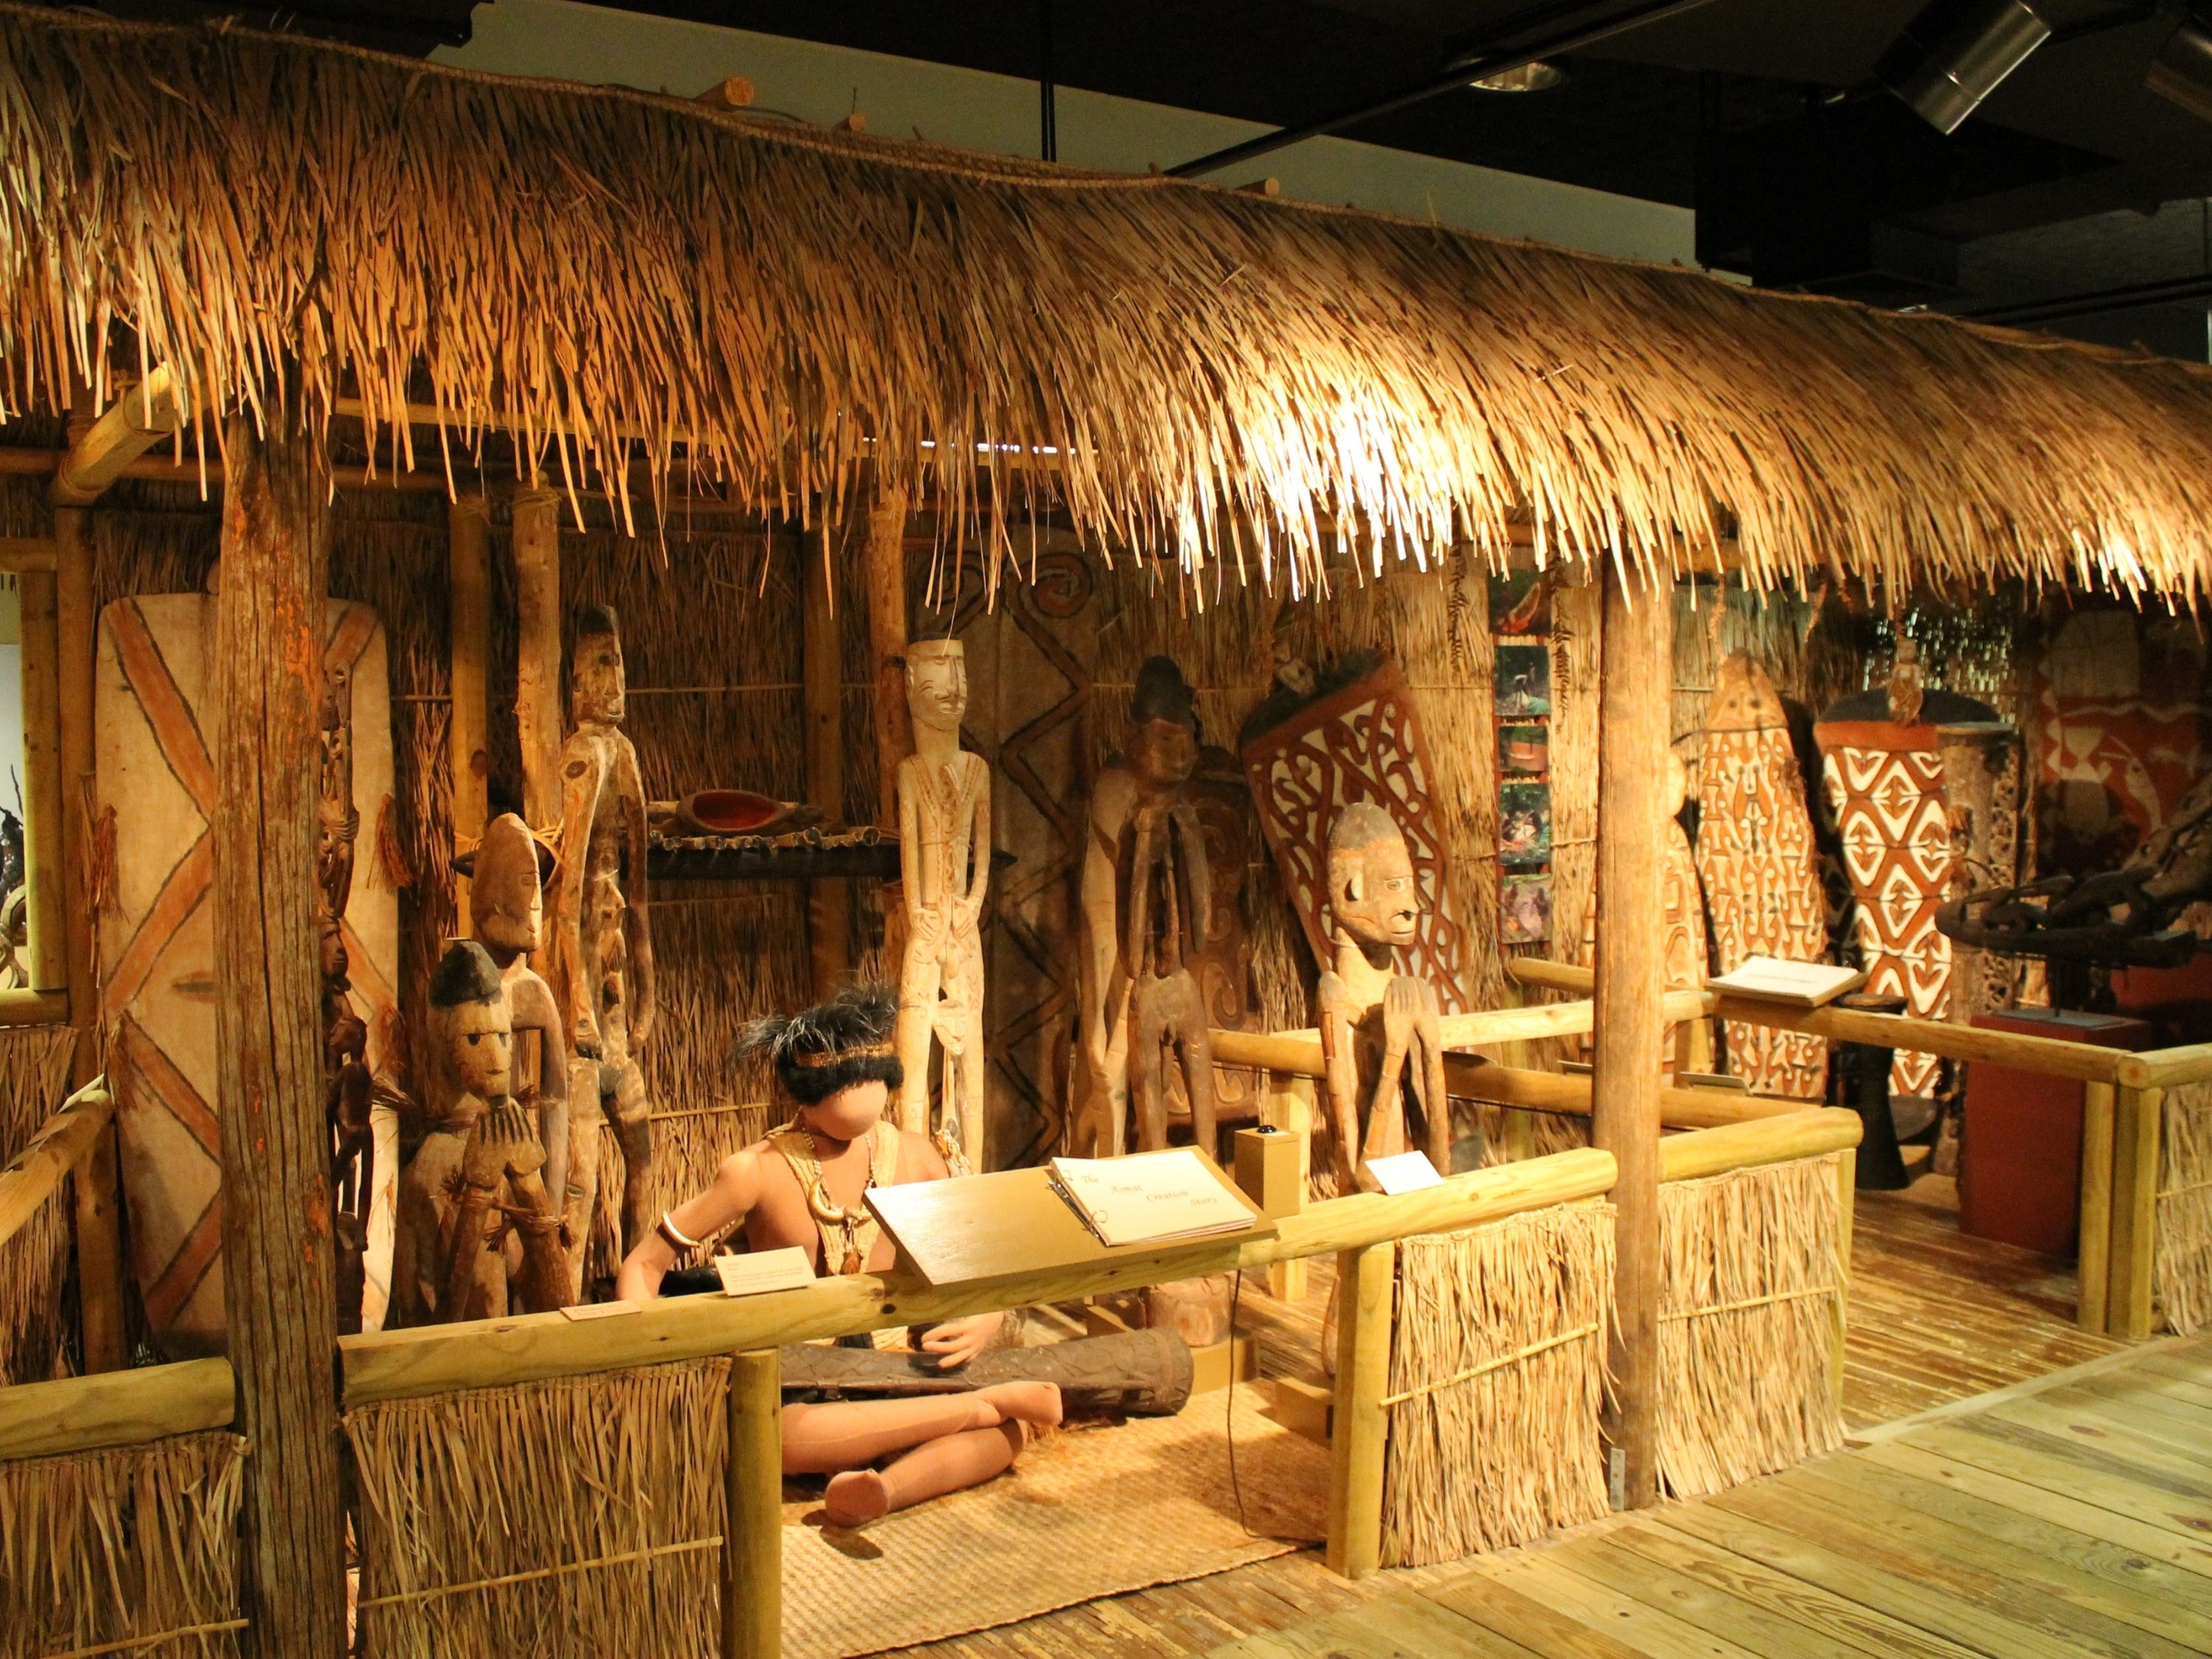  The exhibit is made to look like an Asmat village. Individual cases are modeled after Asmat houses, which are made of wood and have roofs made of woven, stacked leaves. 